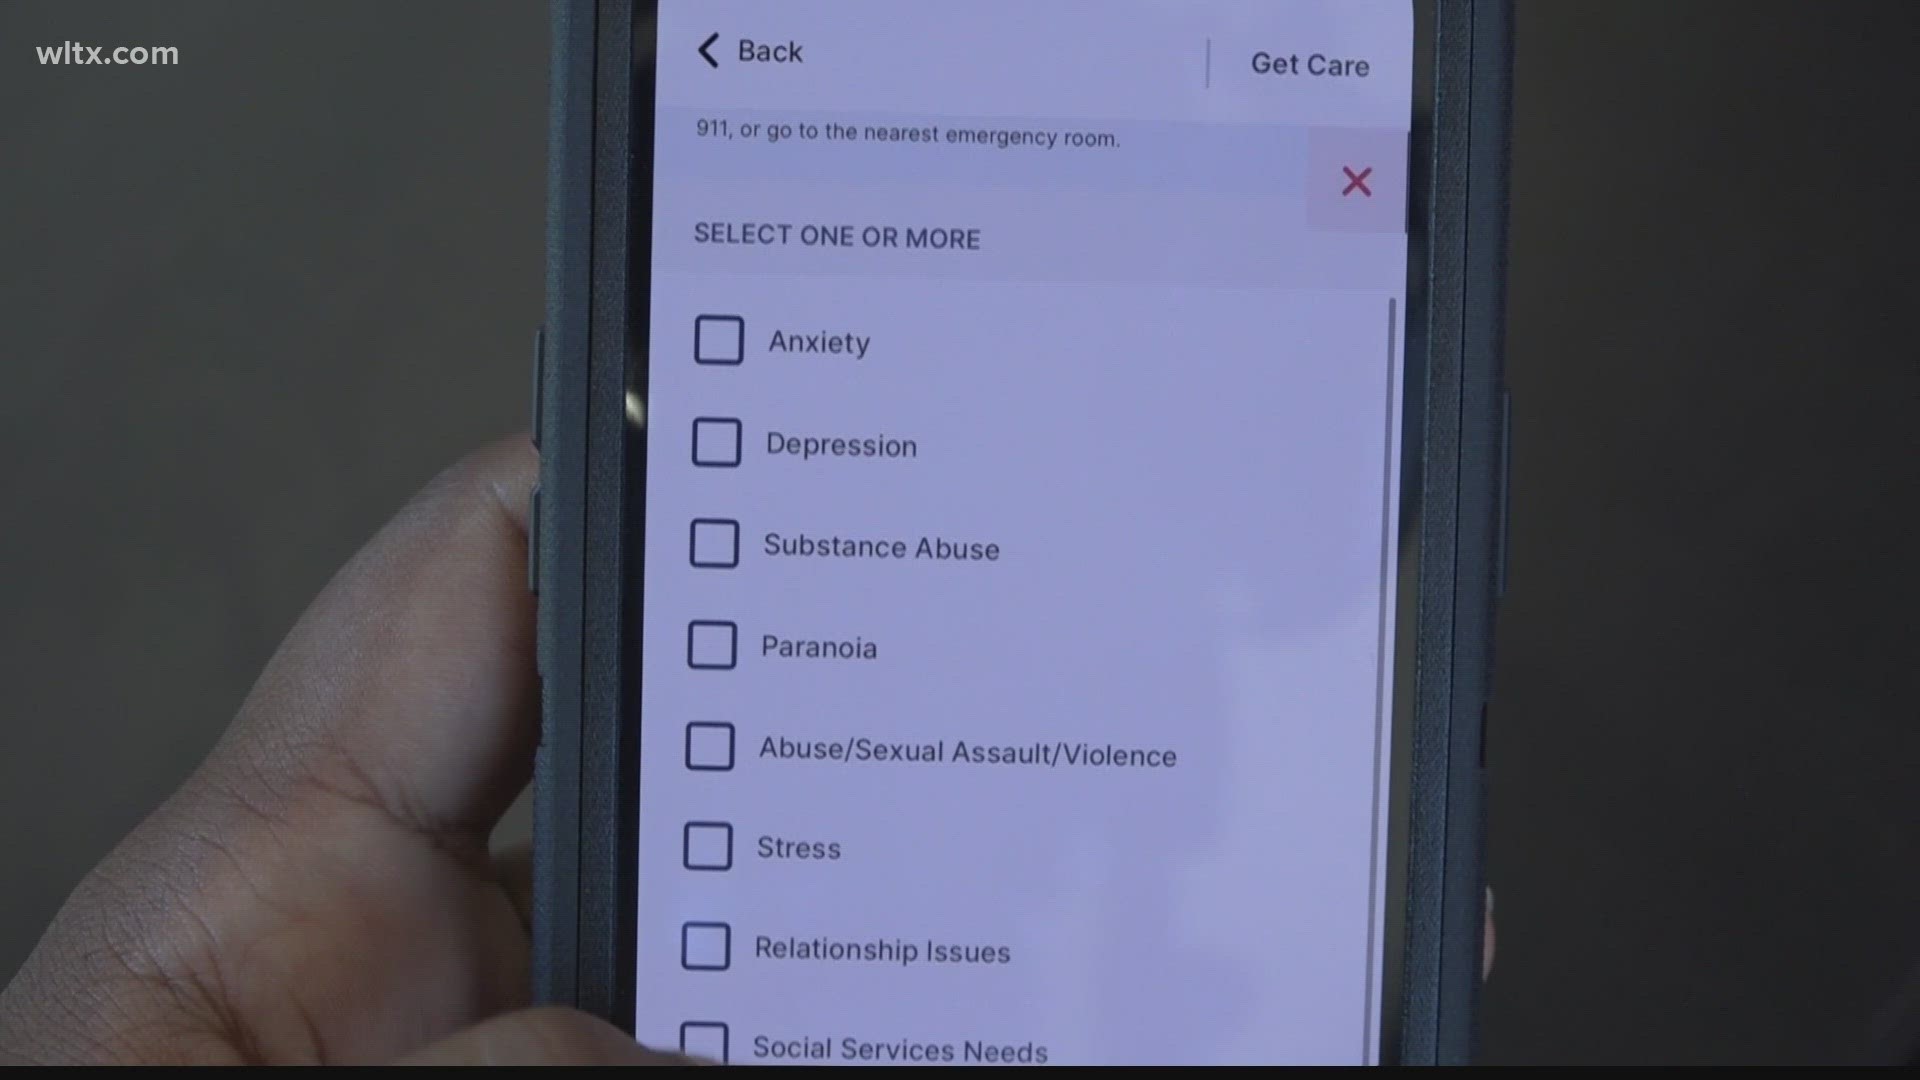 South Carolina State University is one of three colleges in the state offering a new virtual mental health services app, called Timely-Care.